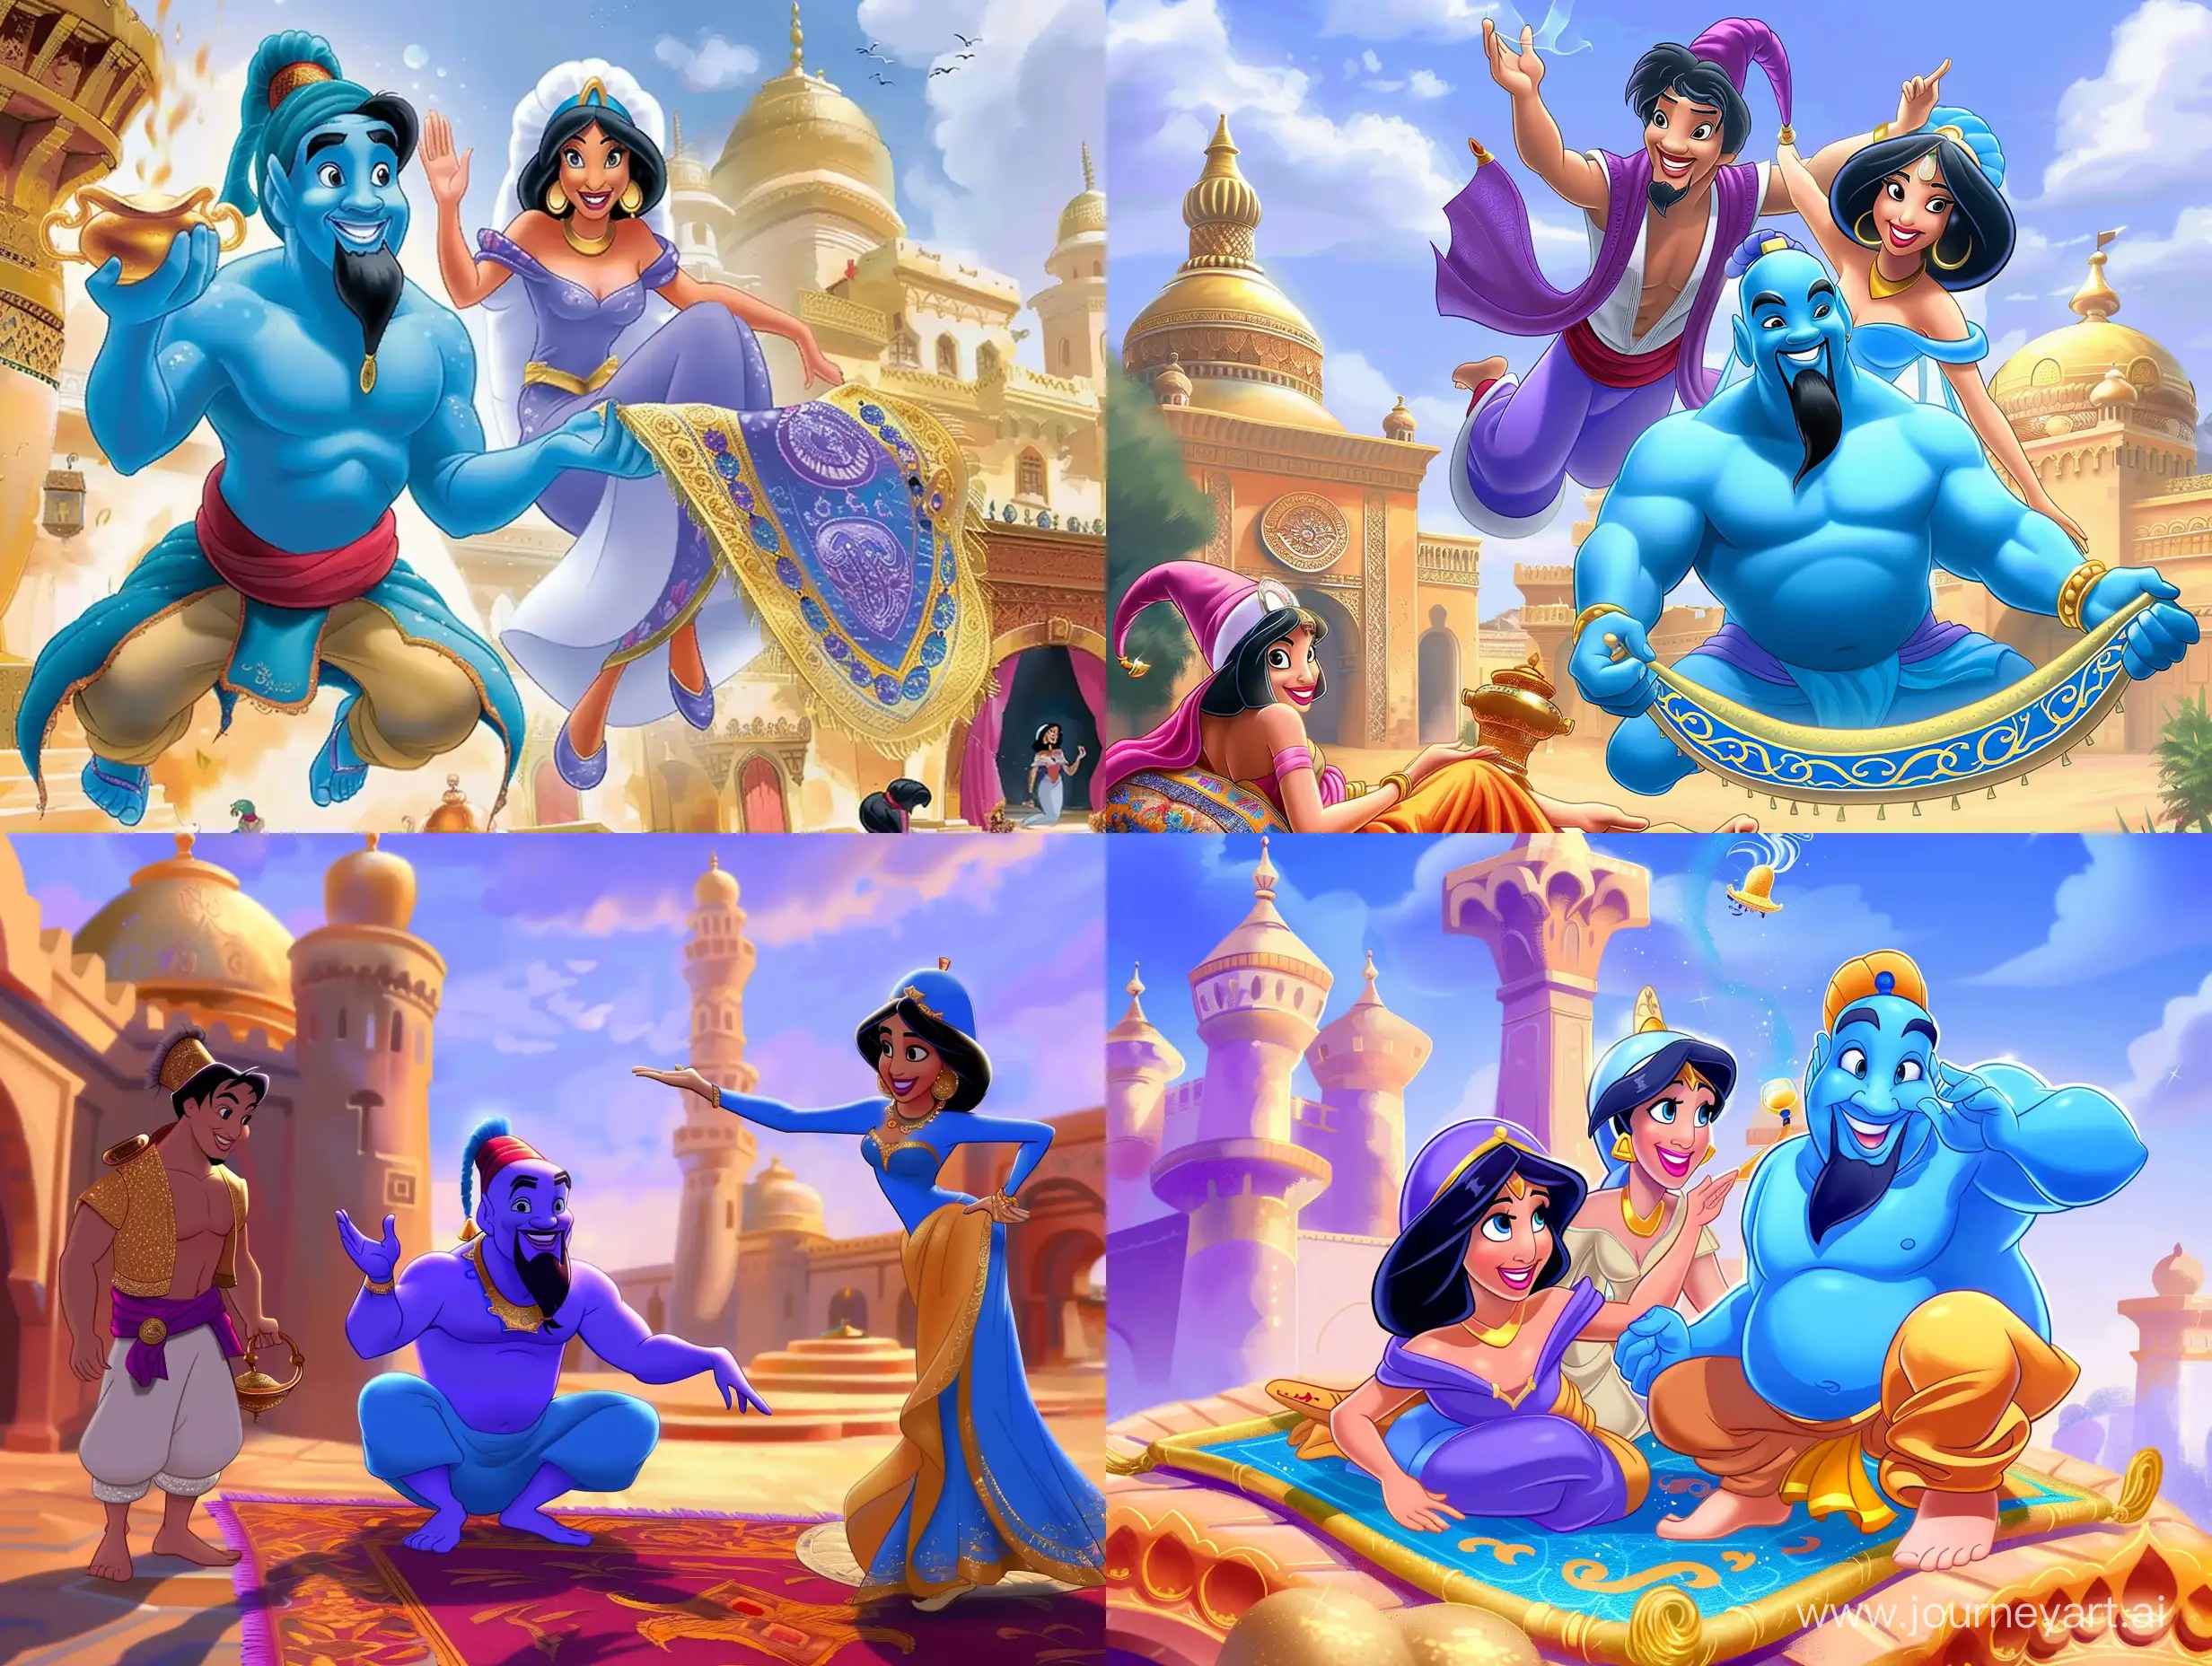 Aladdin-and-Jasmine-Flying-on-Magic-Carpet-with-Genie-by-the-Palace